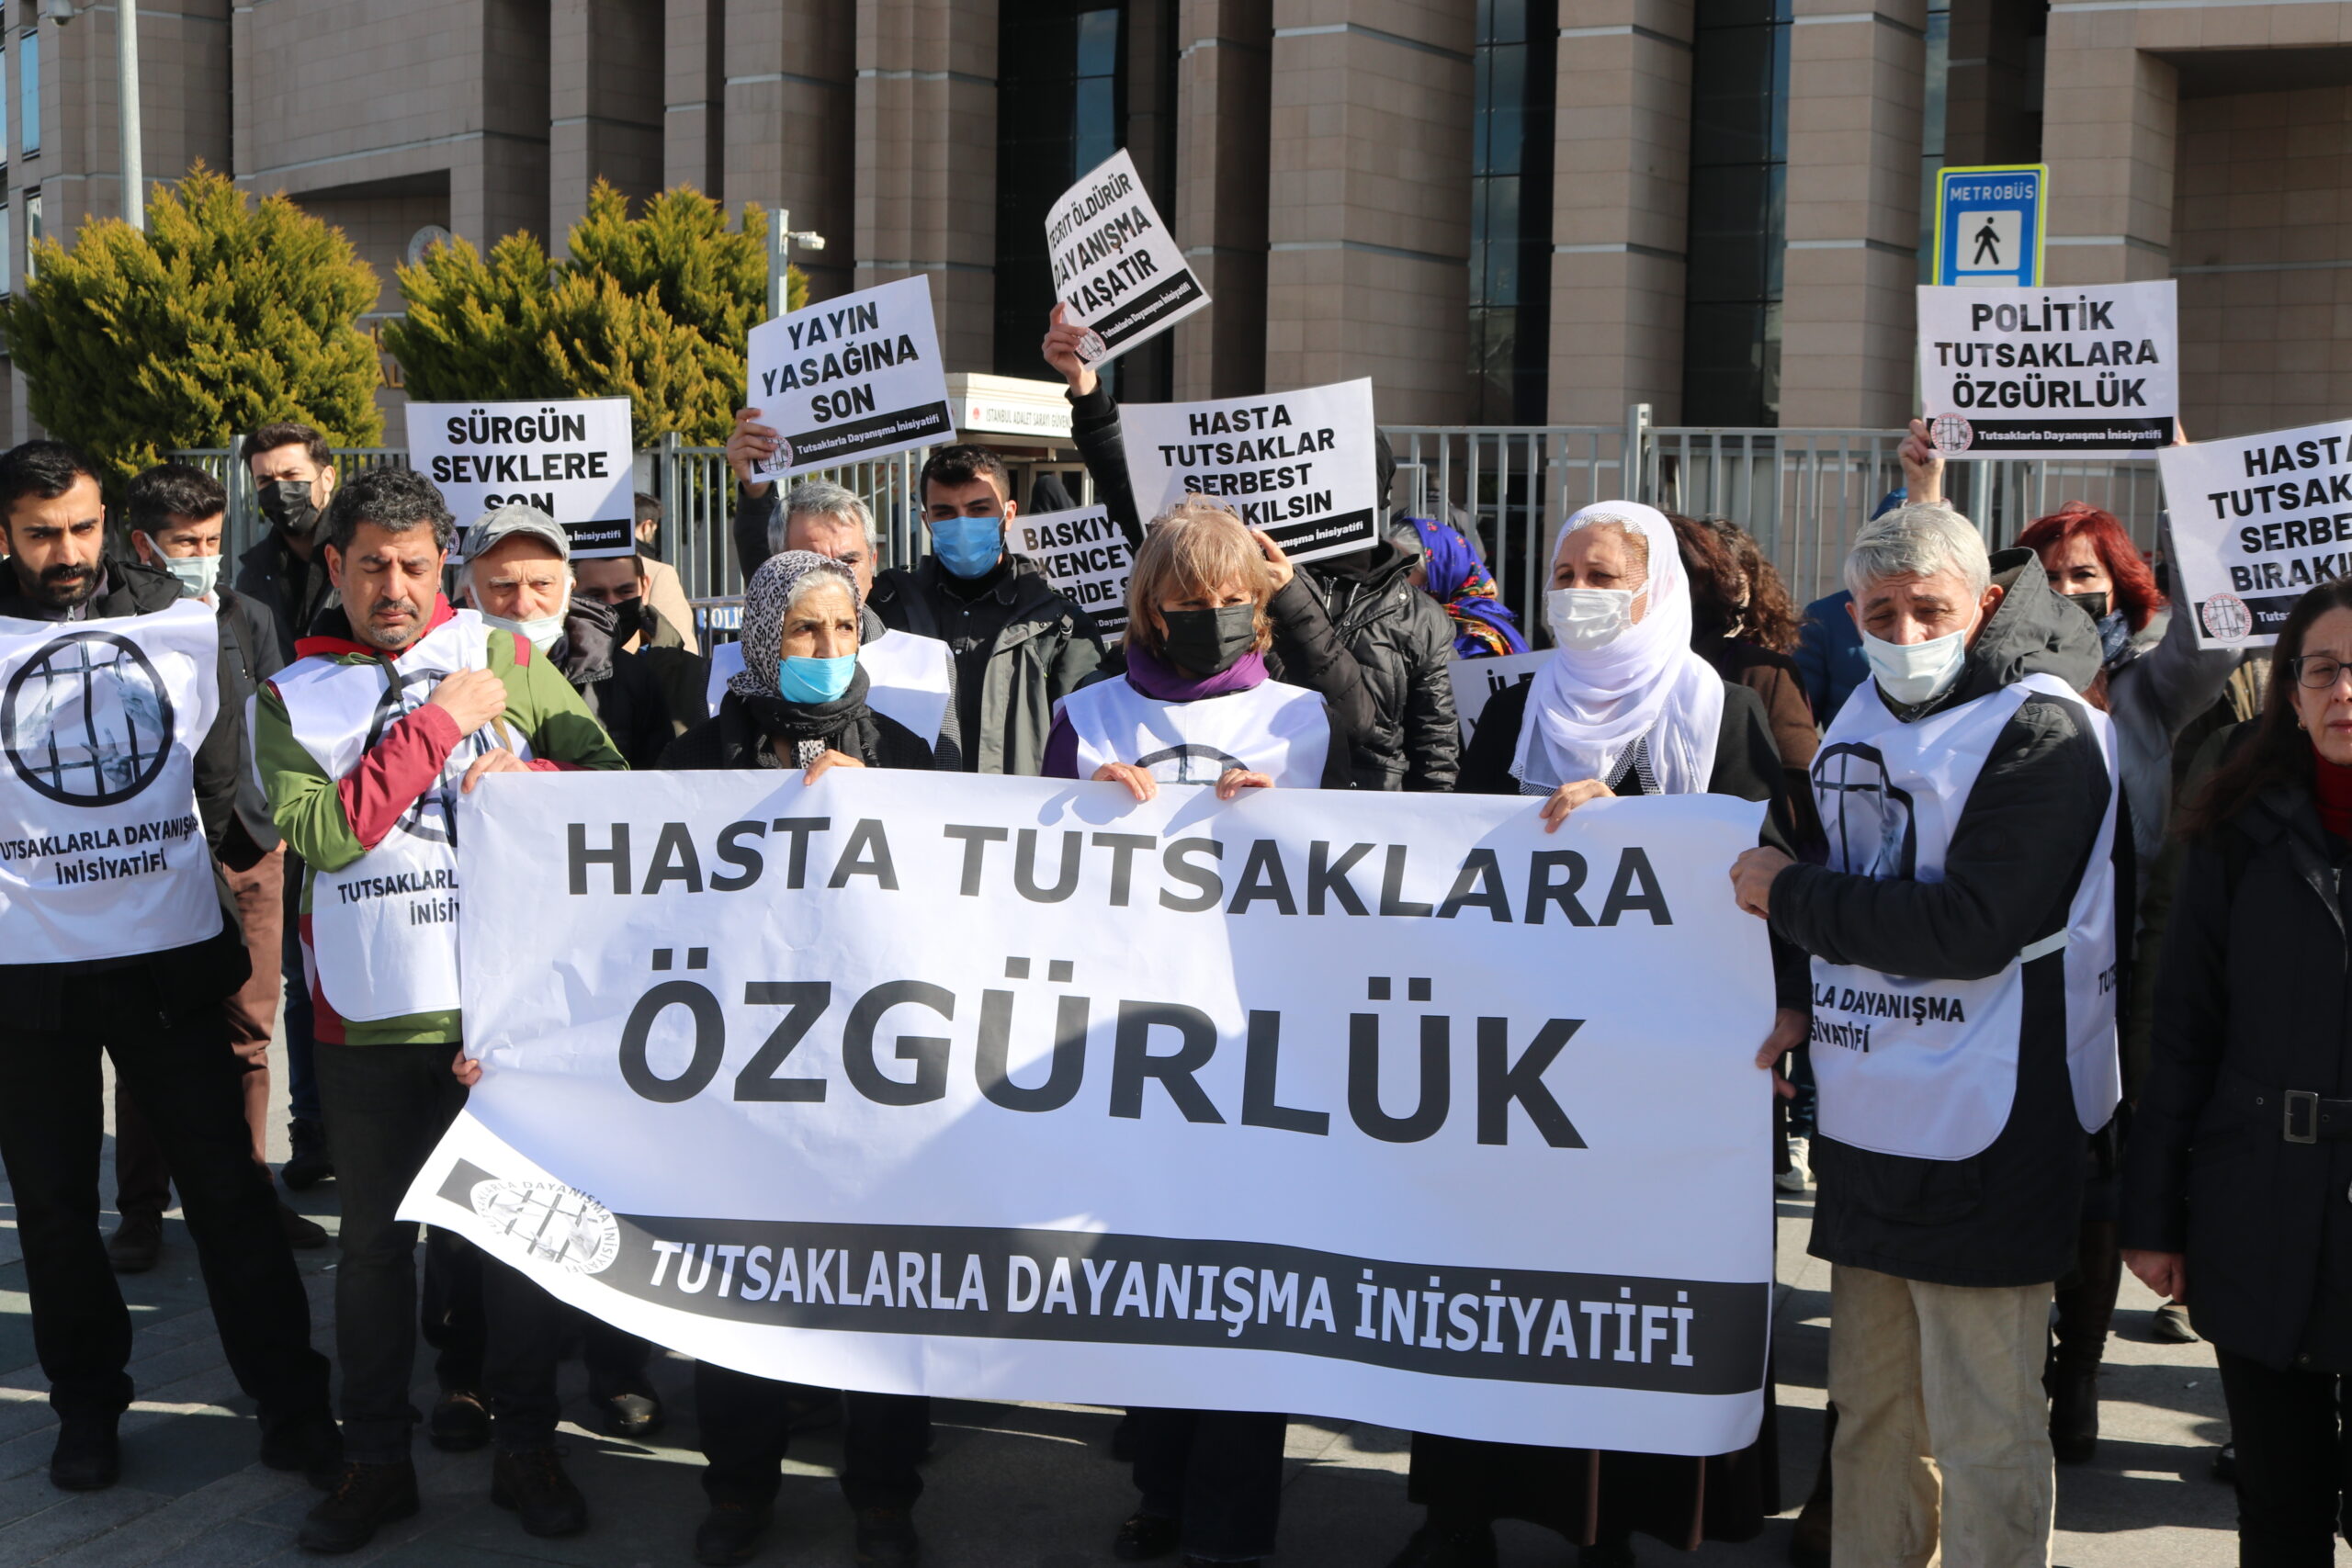 More ill prisoners have died in Turkey’s prisons